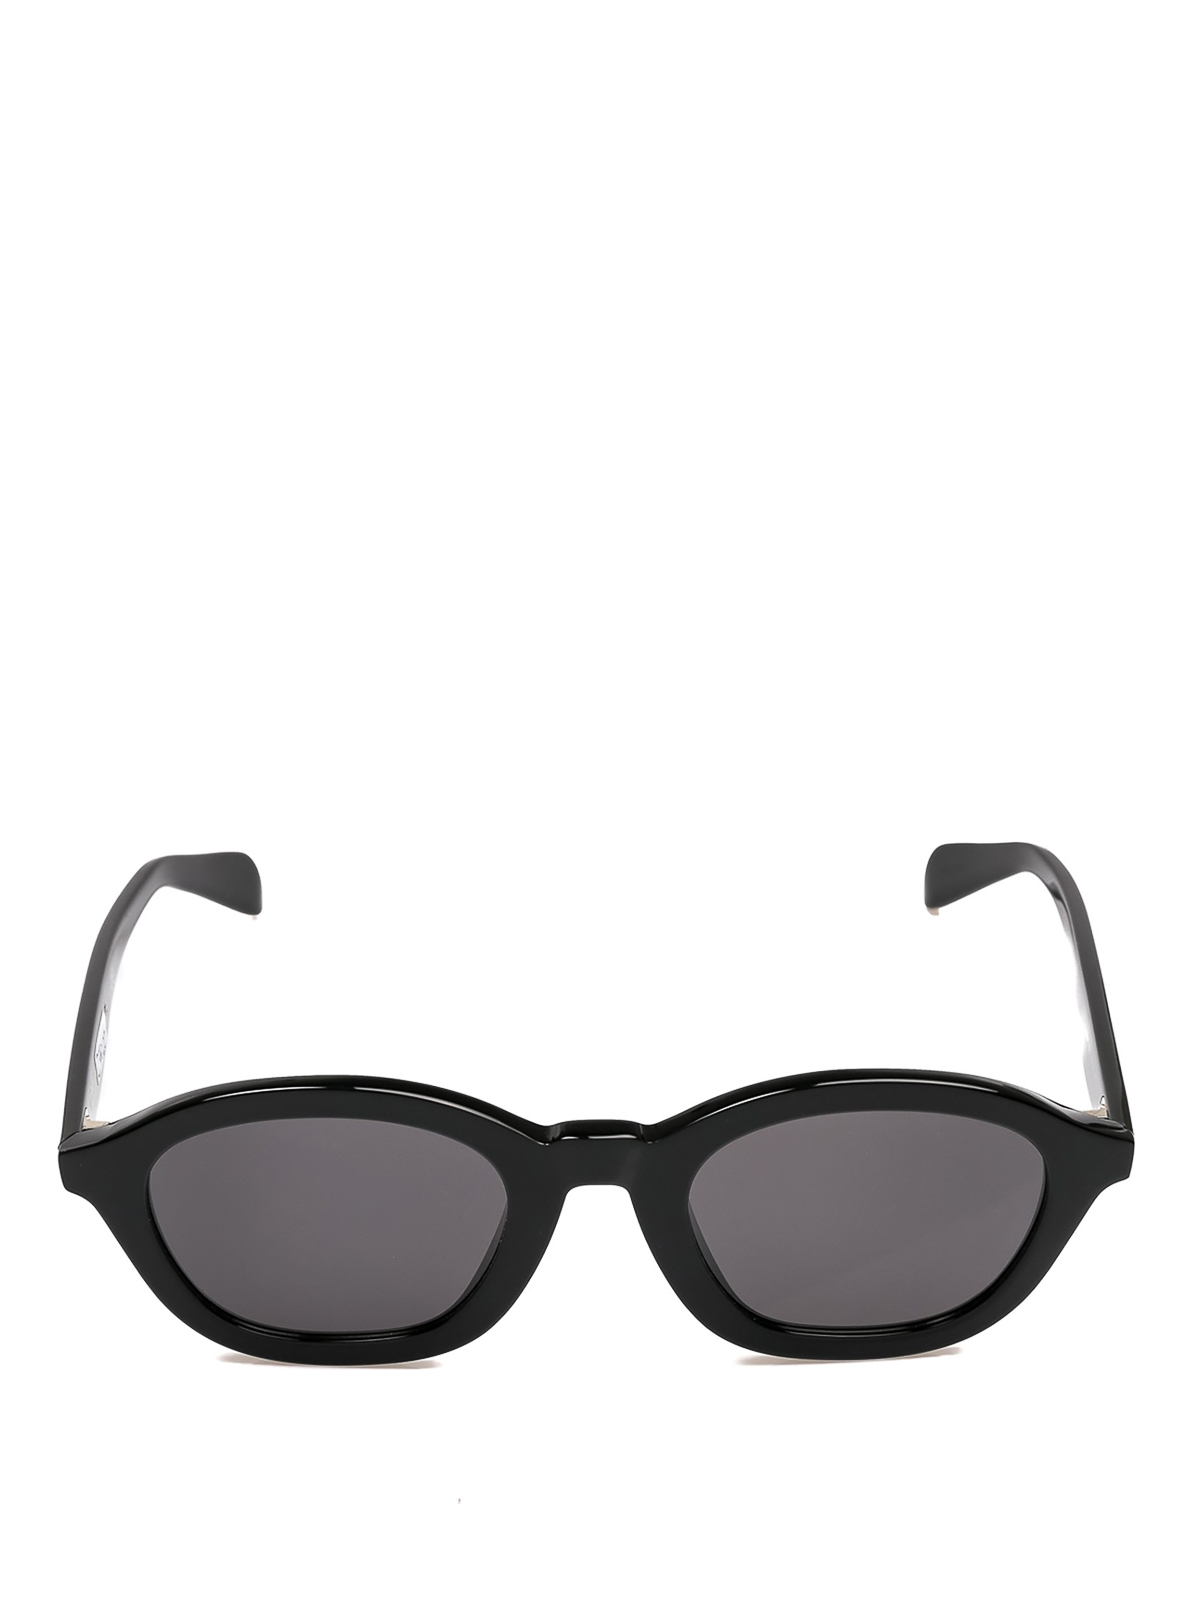 Celine Black Round Sunglasses Clearance, 58% OFF | www 